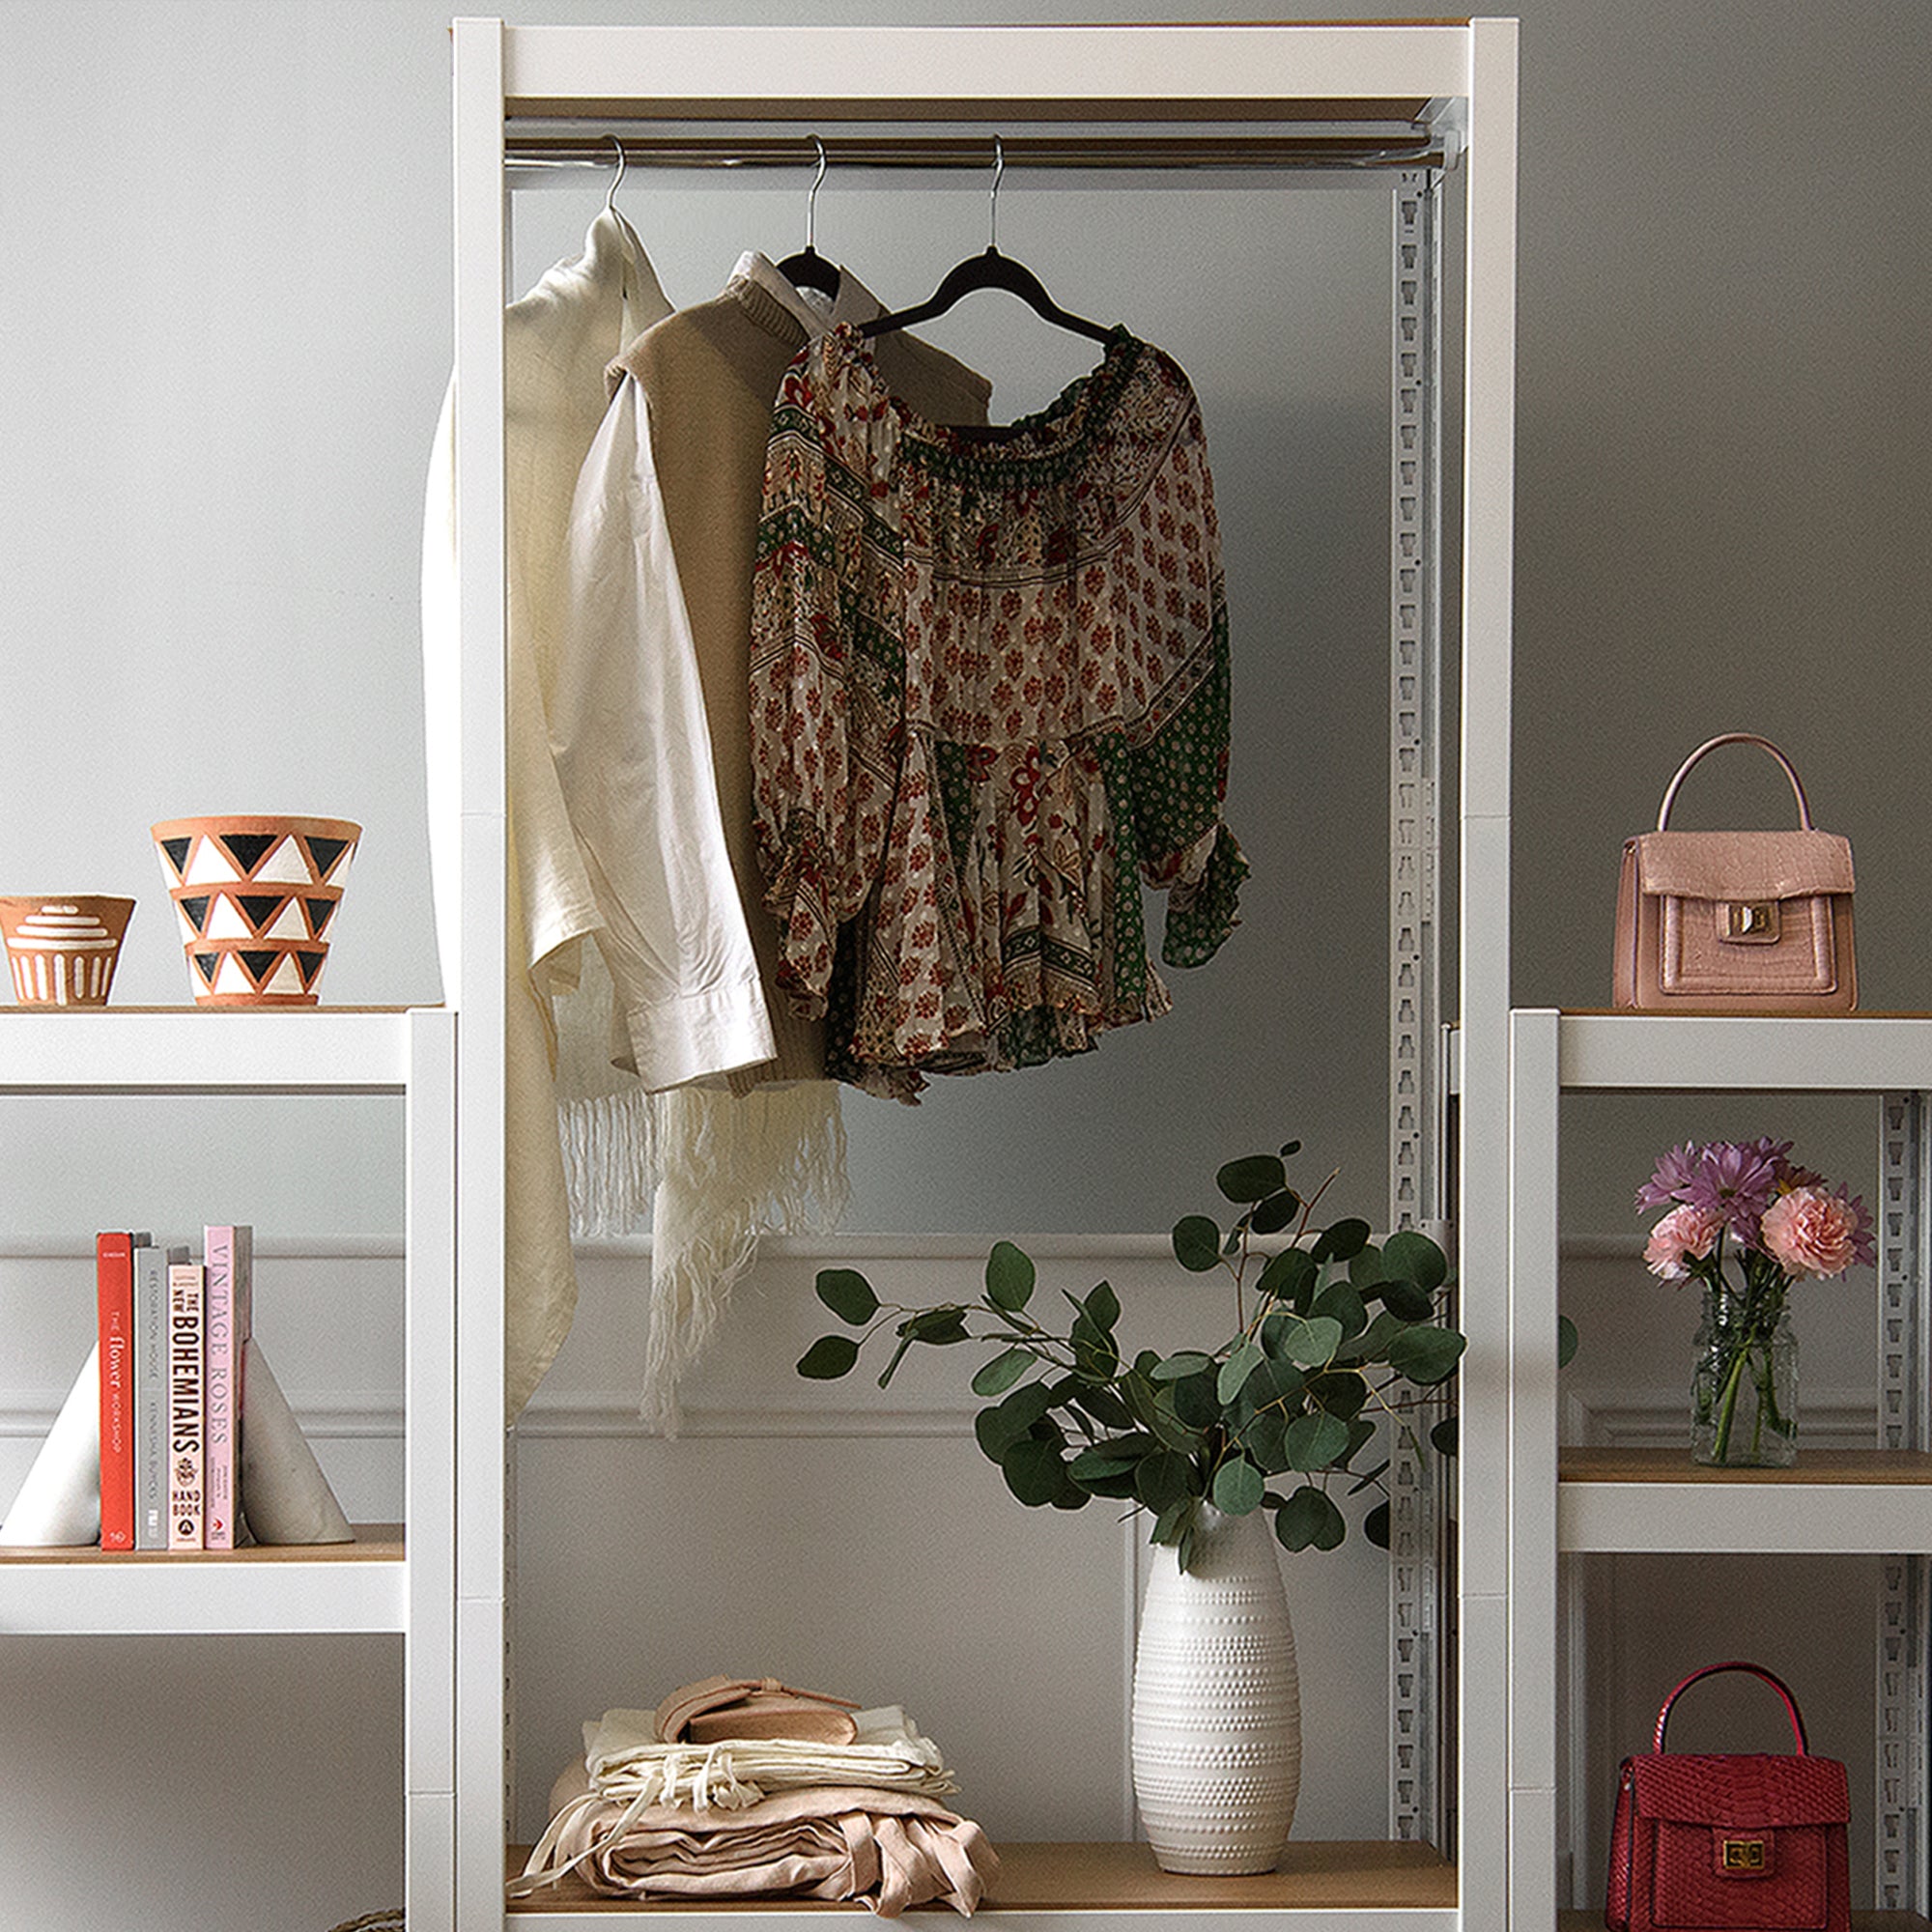 The Standard Clothing Rack with 1 Shelf Module